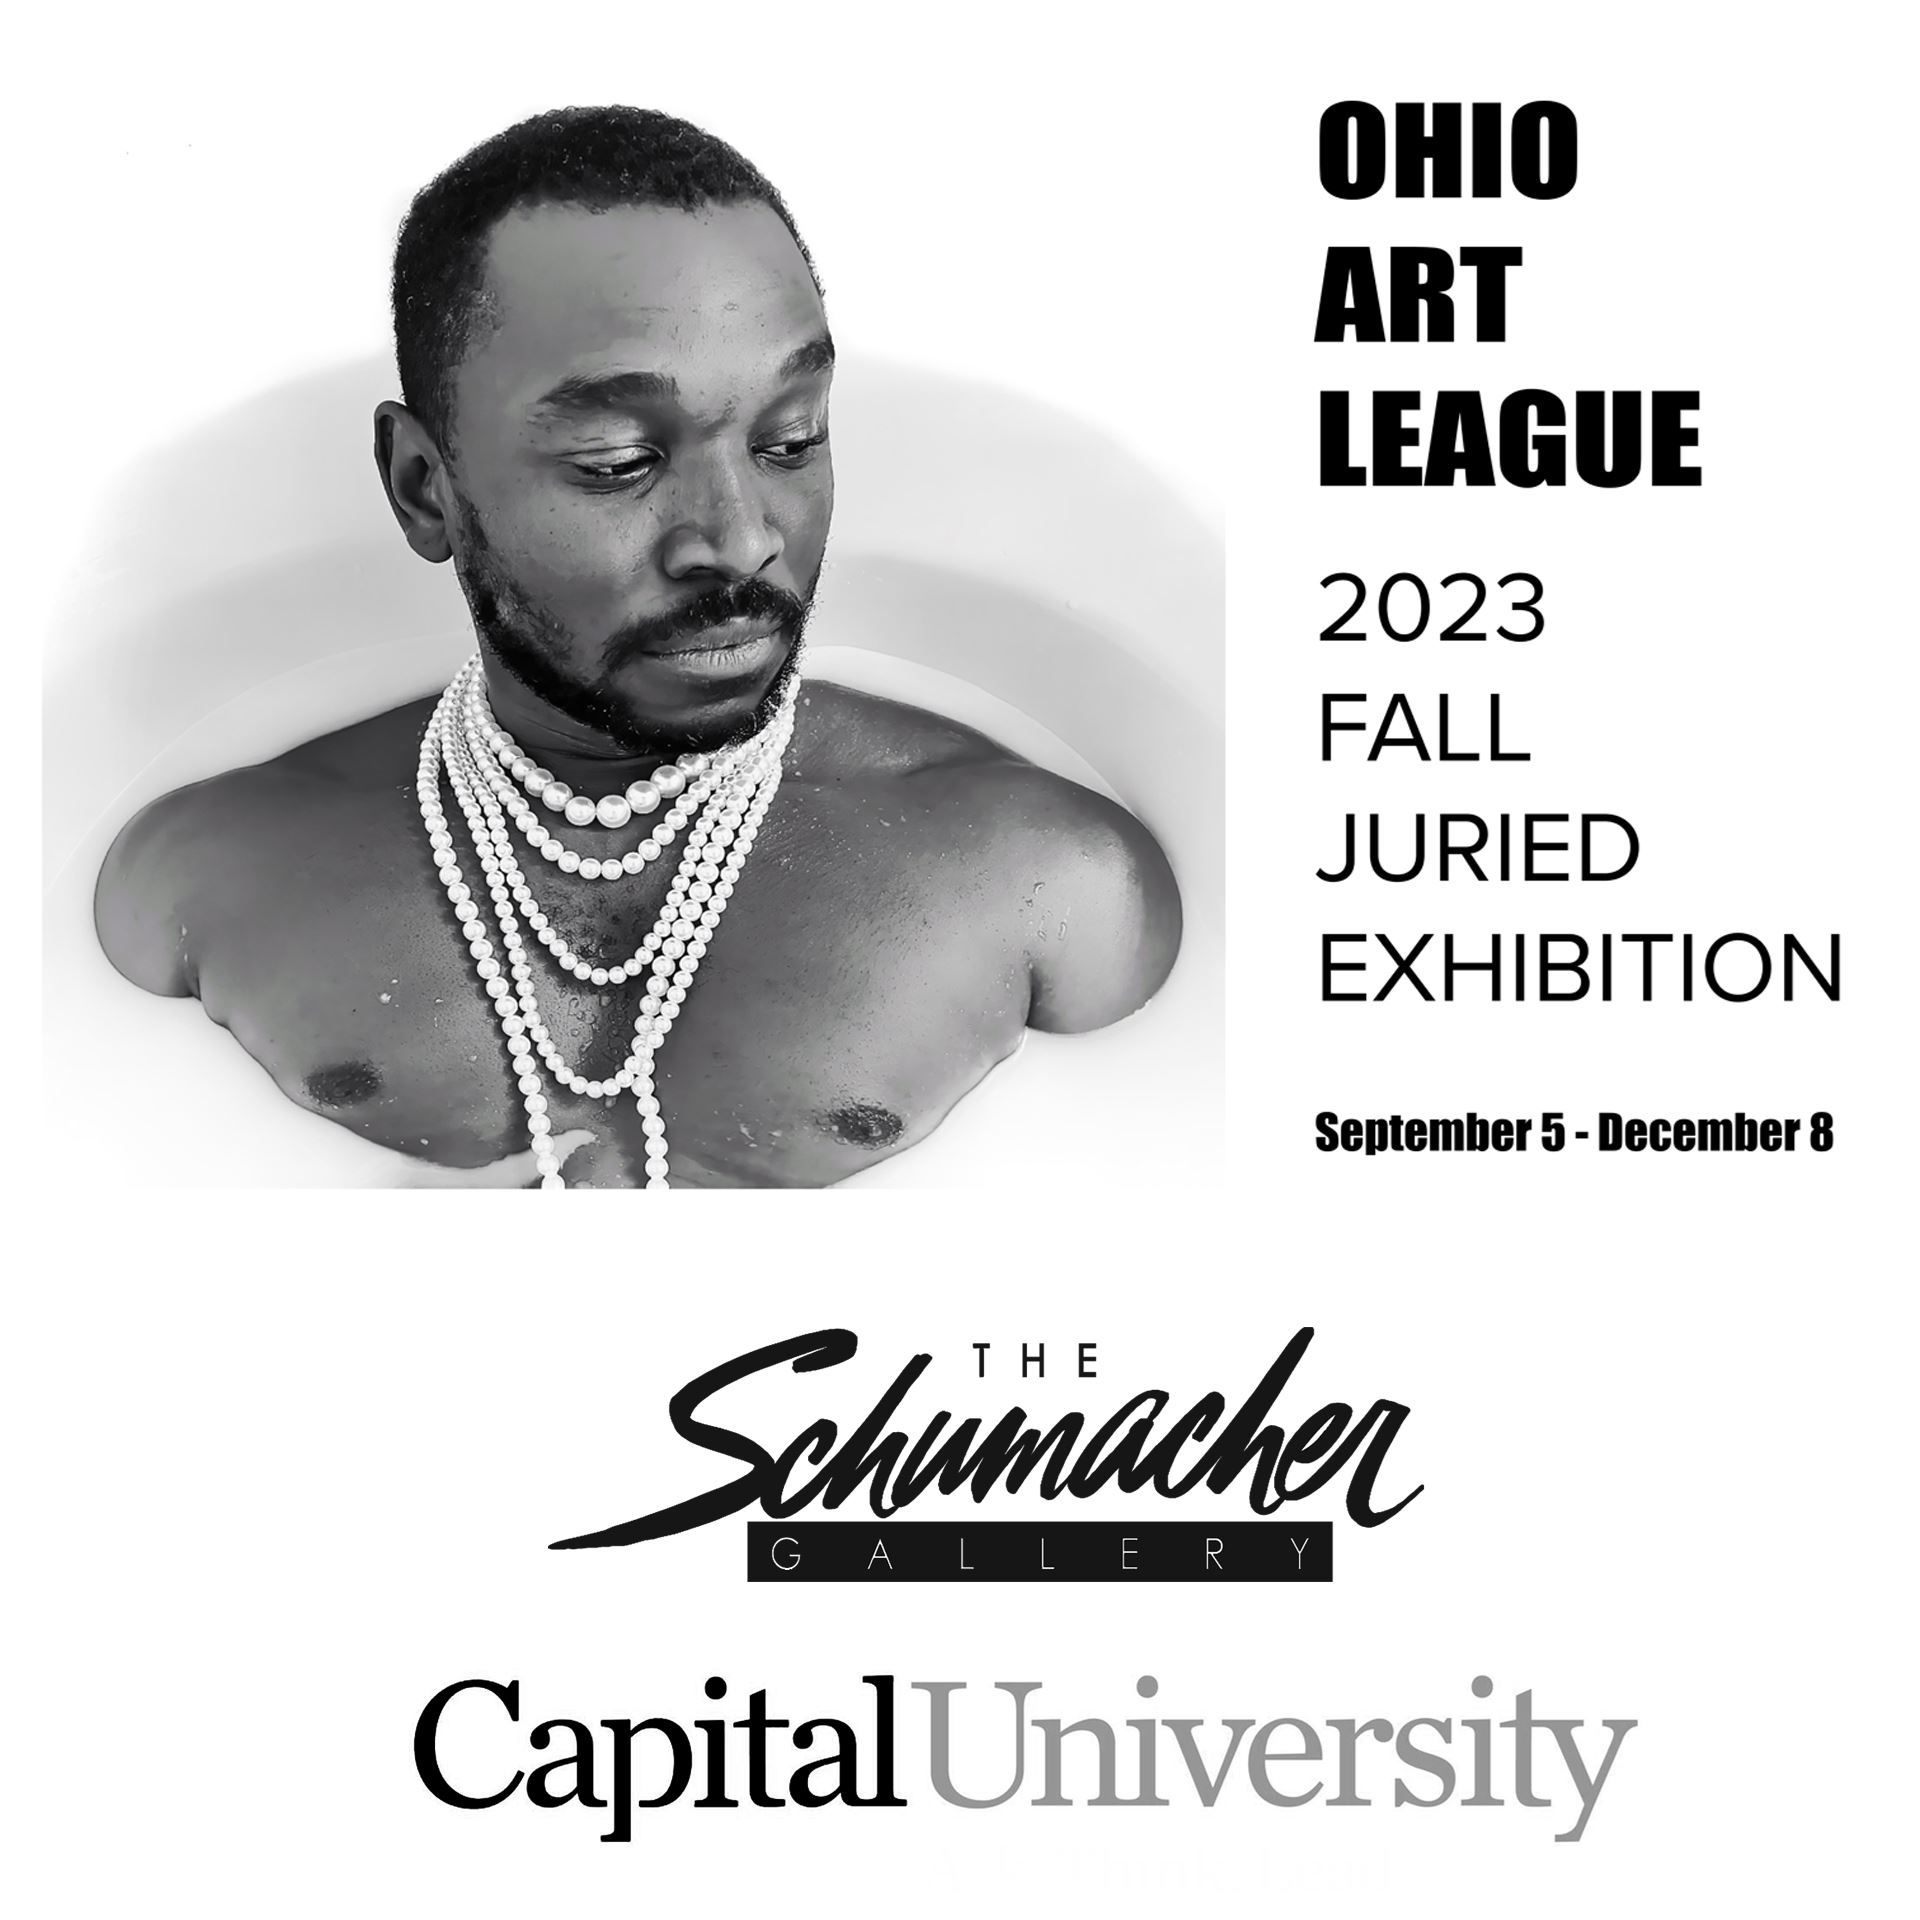 show card for the fall juried exhibition featuring artwork with a black male wearing pearls in a bathtub of milk